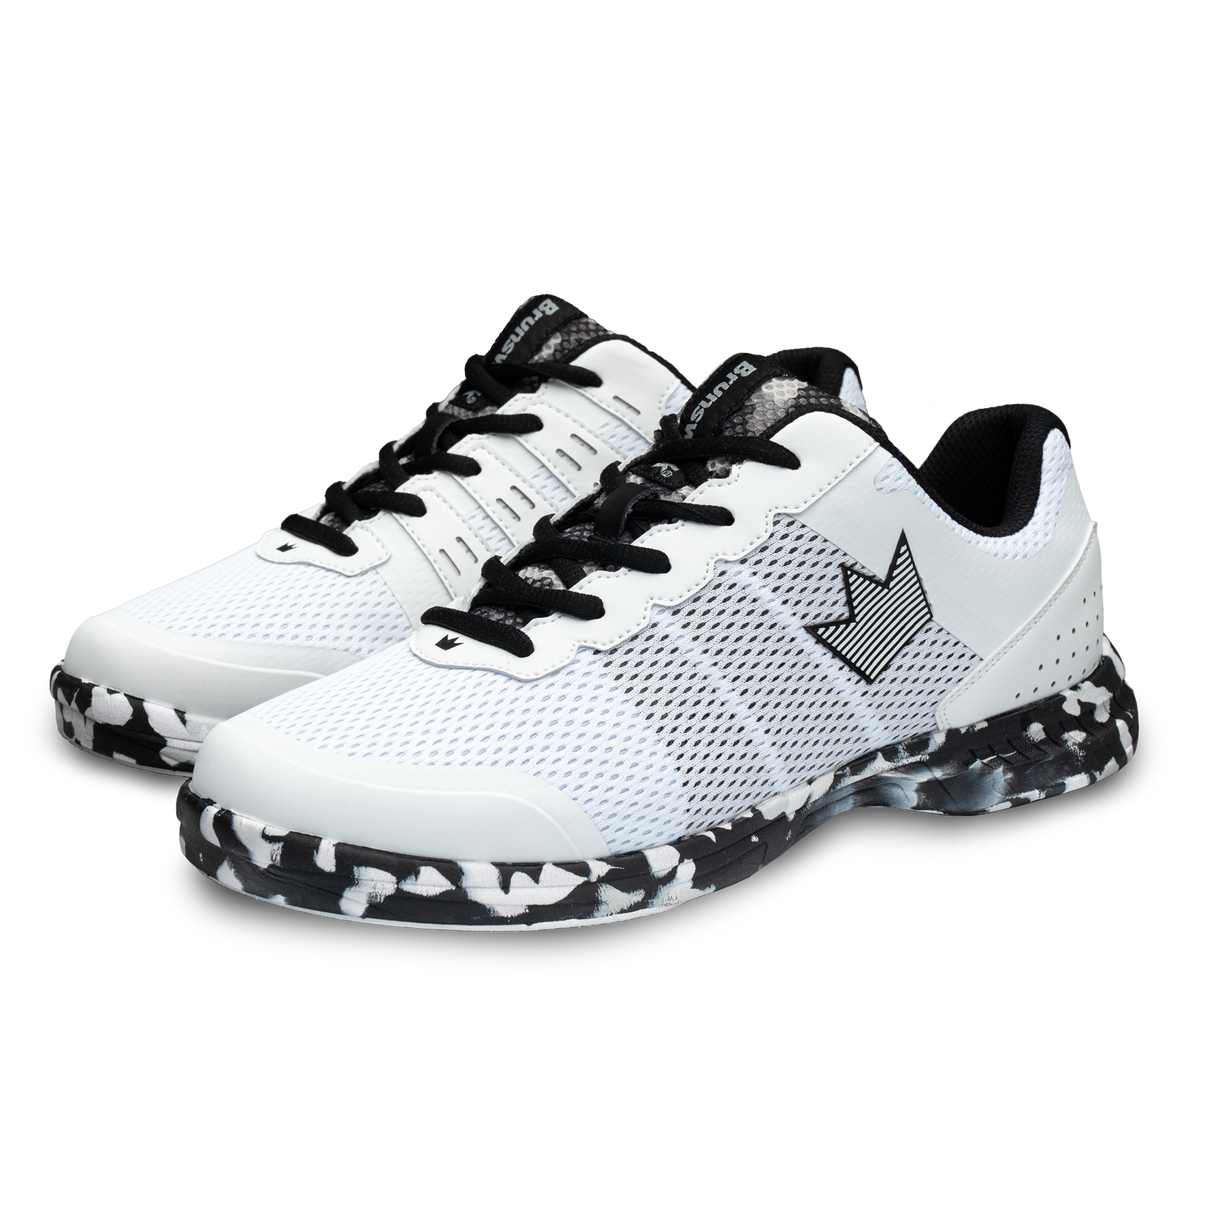 Brunswick Fuze Chaos Bowling Shoes * Performance synthetic uppers * Extra light molded EVA outsole * Pure slide microfiber slide soles on both shoes * Foam padded collar and tongue * Superior slide immediately * Right hand only